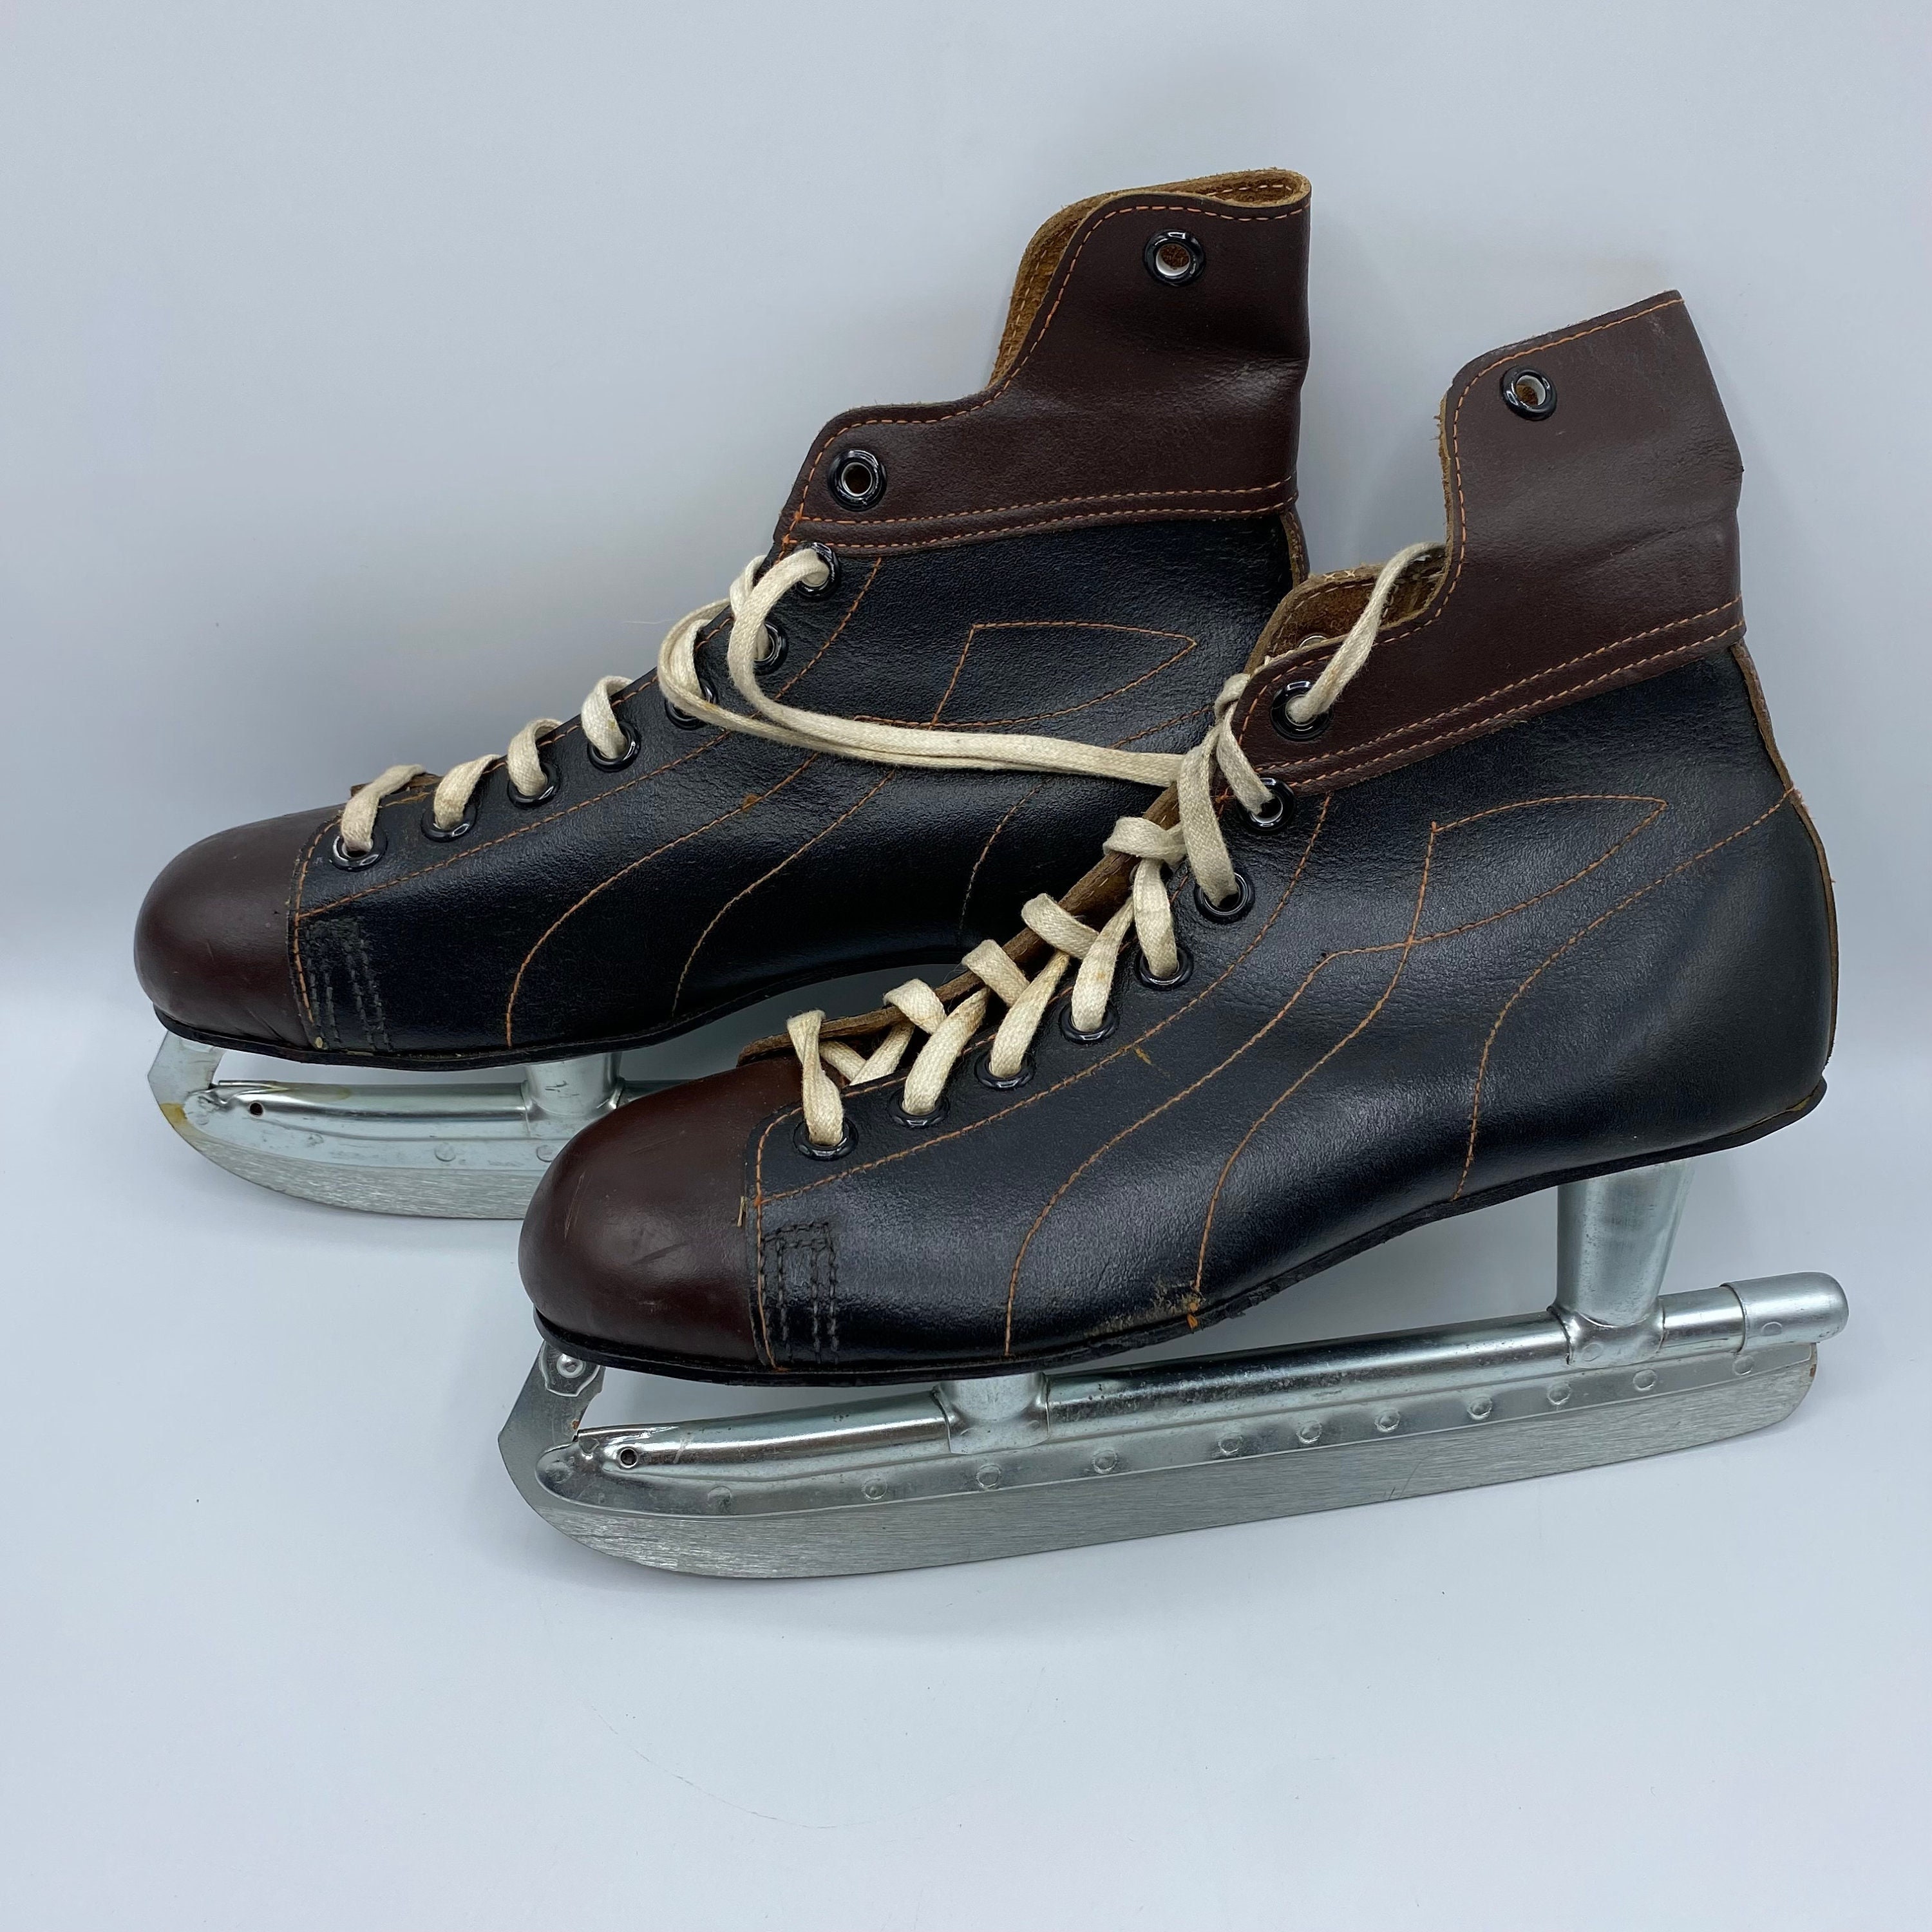 Schoenen Herenschoenen Loafers & Instappers Vintage  RETRO brown and black leather  DAOUST DELUX tube blades  men  Ice Hockey Skates    Size 11 Canada 